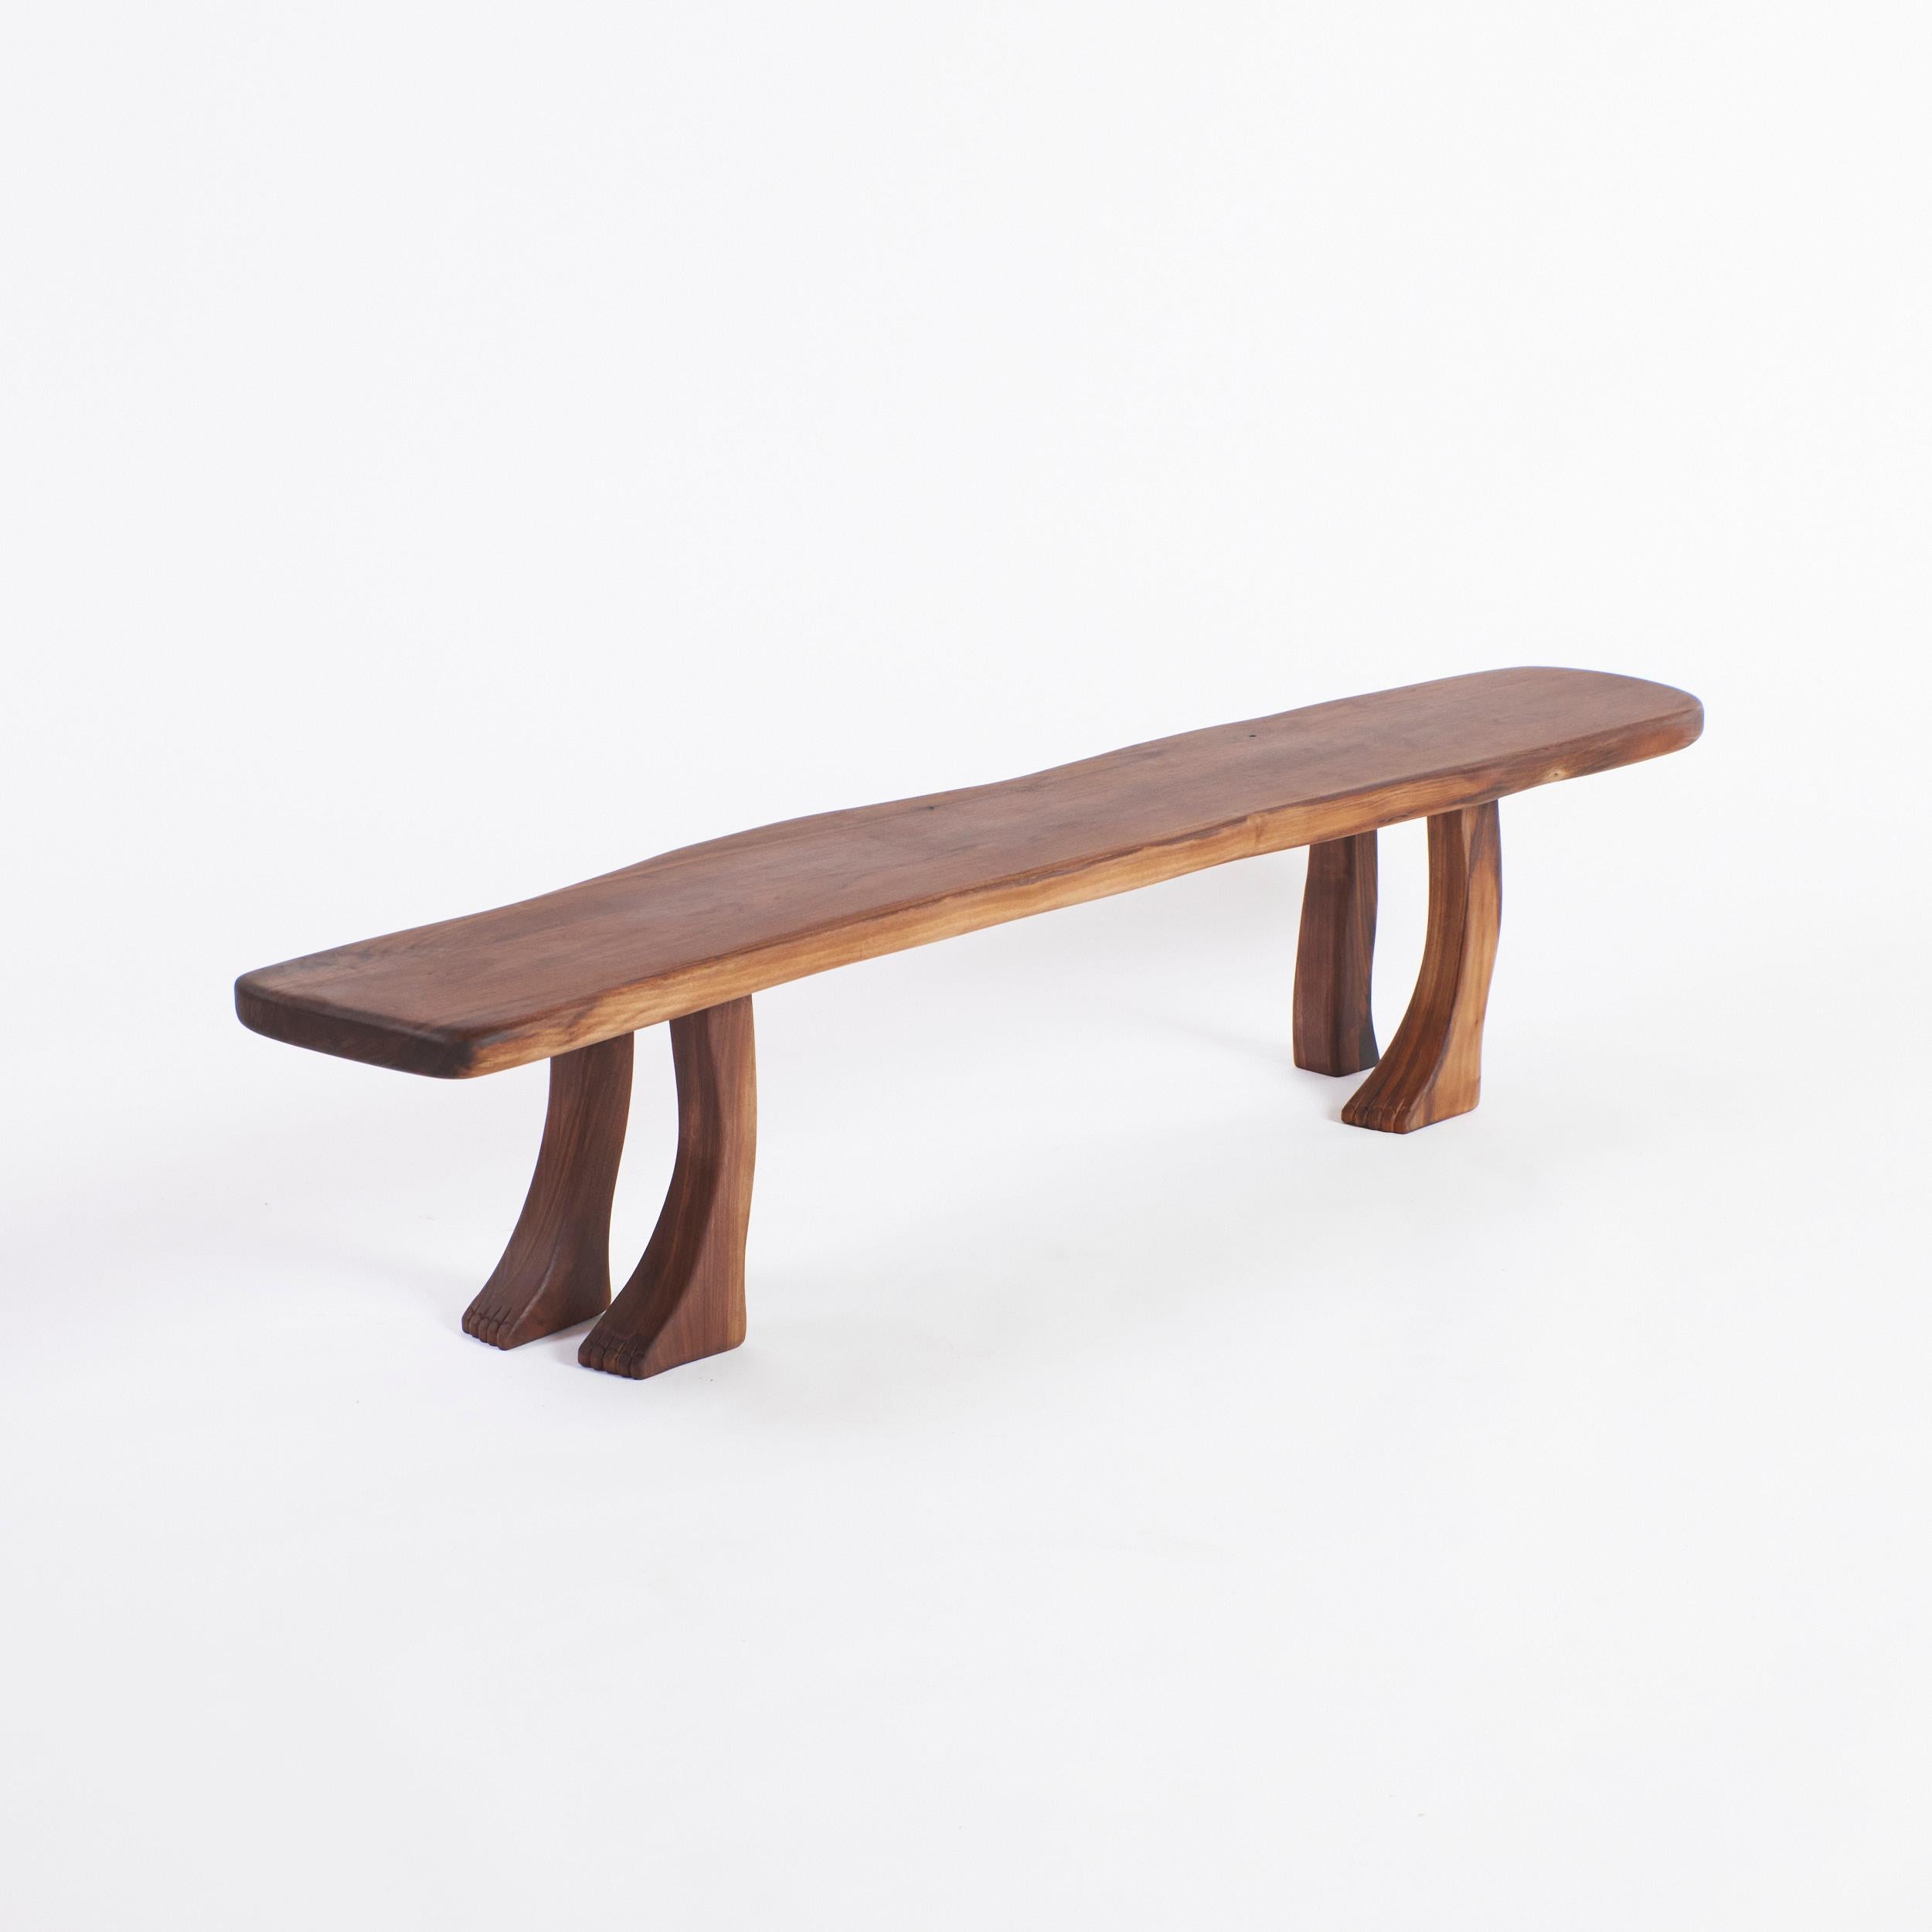 Foot Walnut Bench by Project 213A
Dimensions: W 140 x D 27 x H 30 cm
Materials: Walnut

This playful design is part of Project 213A's hand carved wooden 